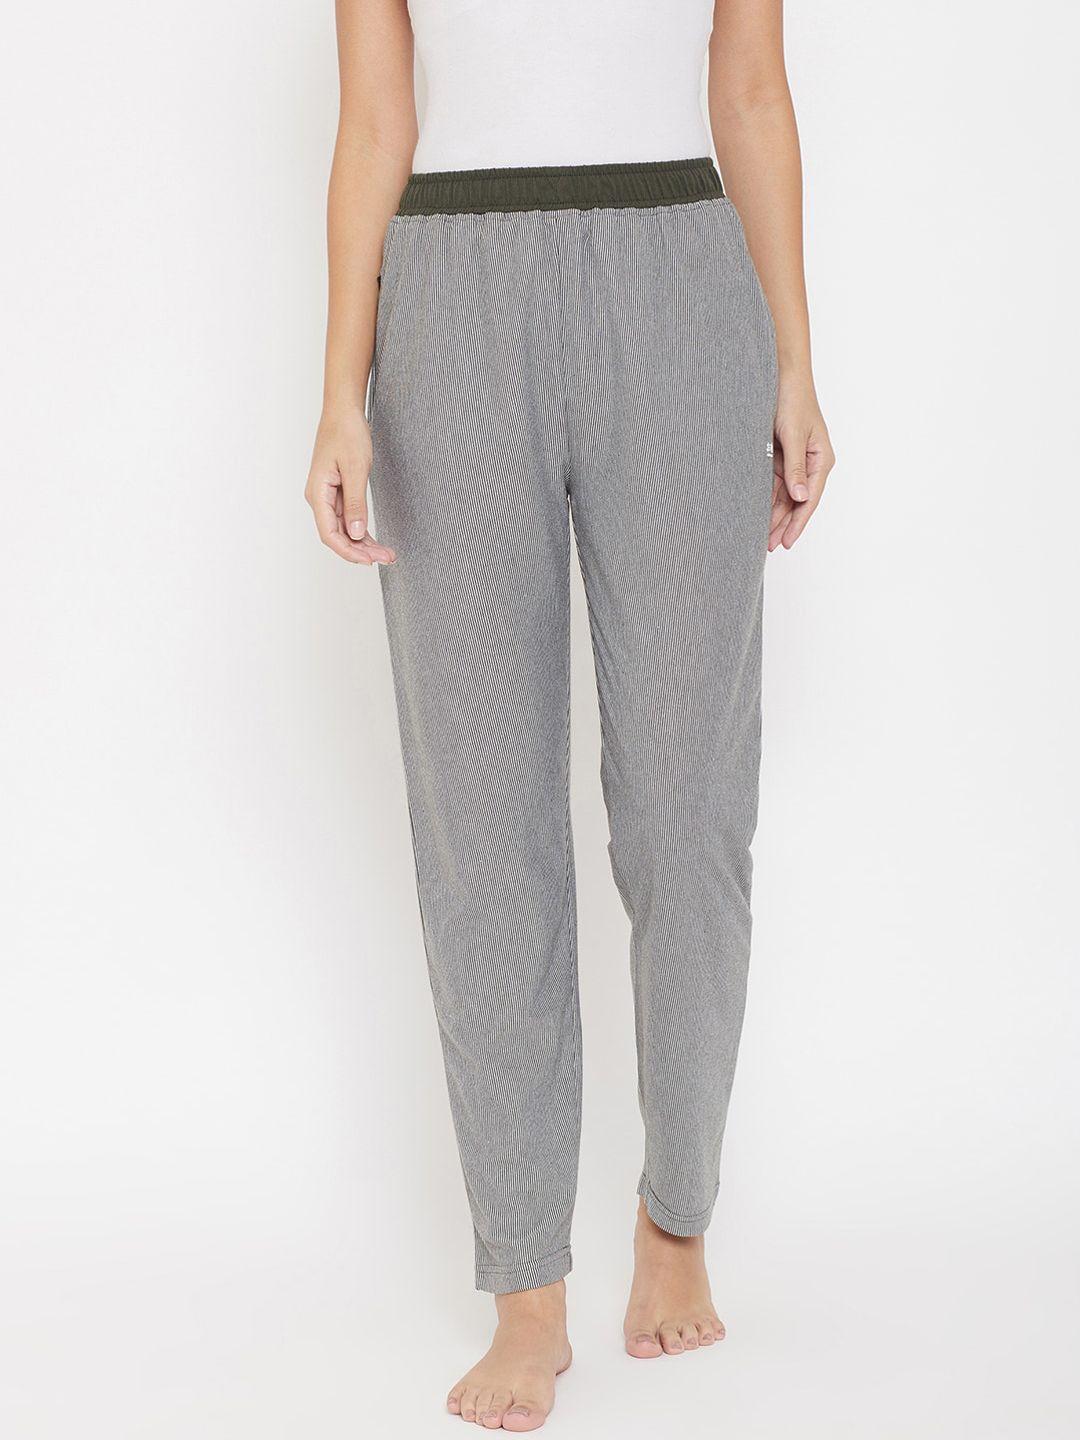 okane-women-olive-green-striped-relaxed-fit-trackpants